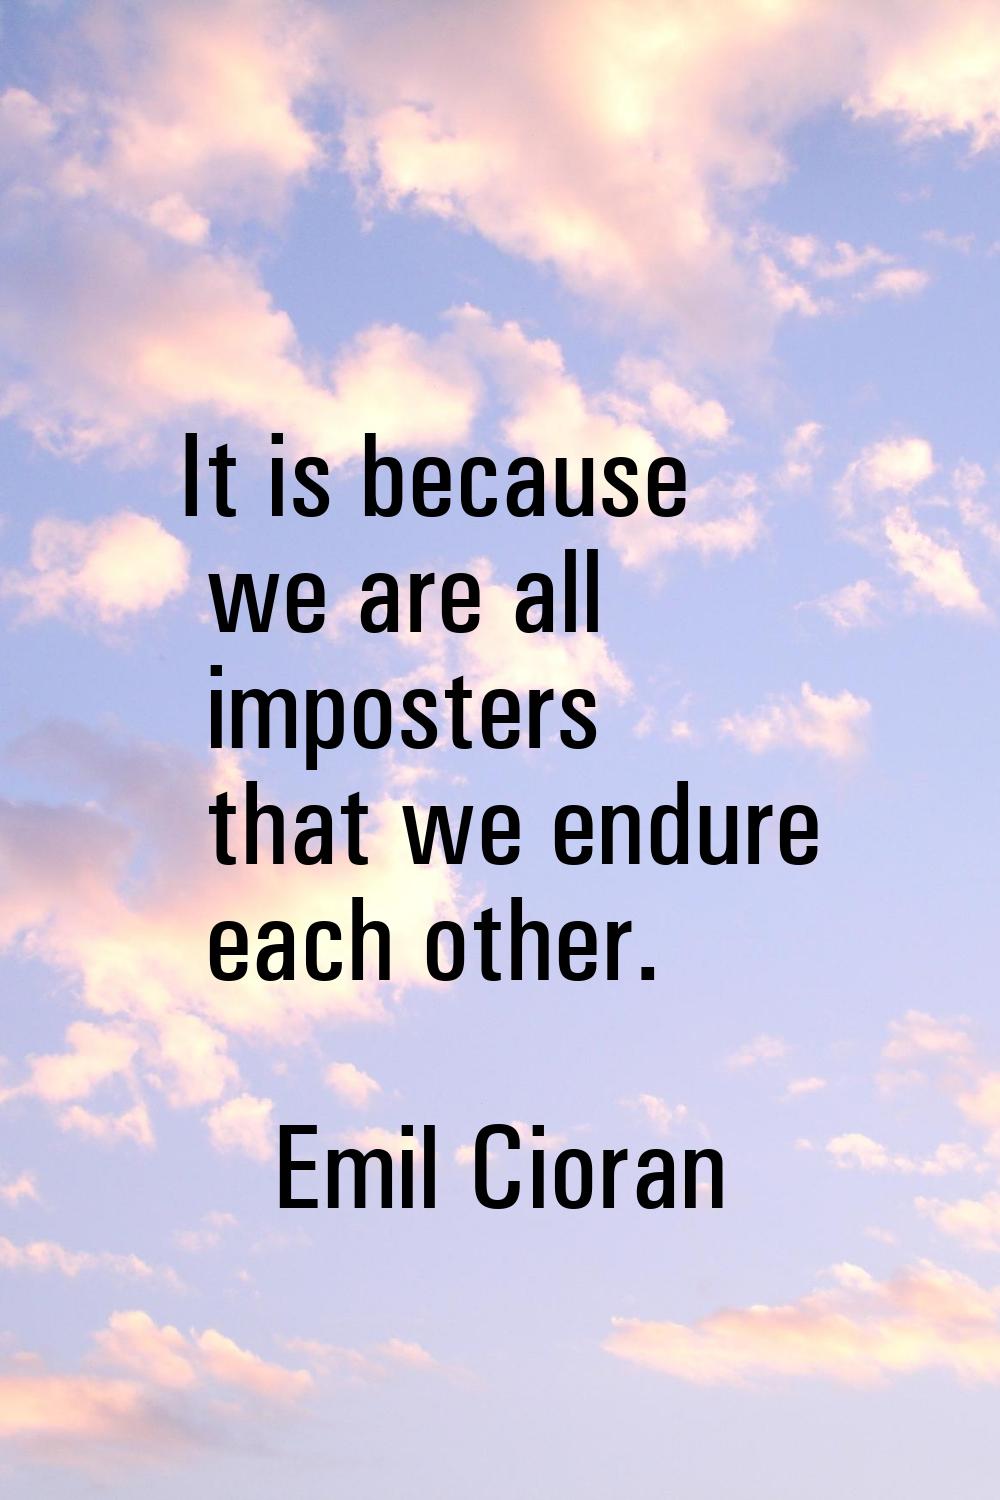 It is because we are all imposters that we endure each other.